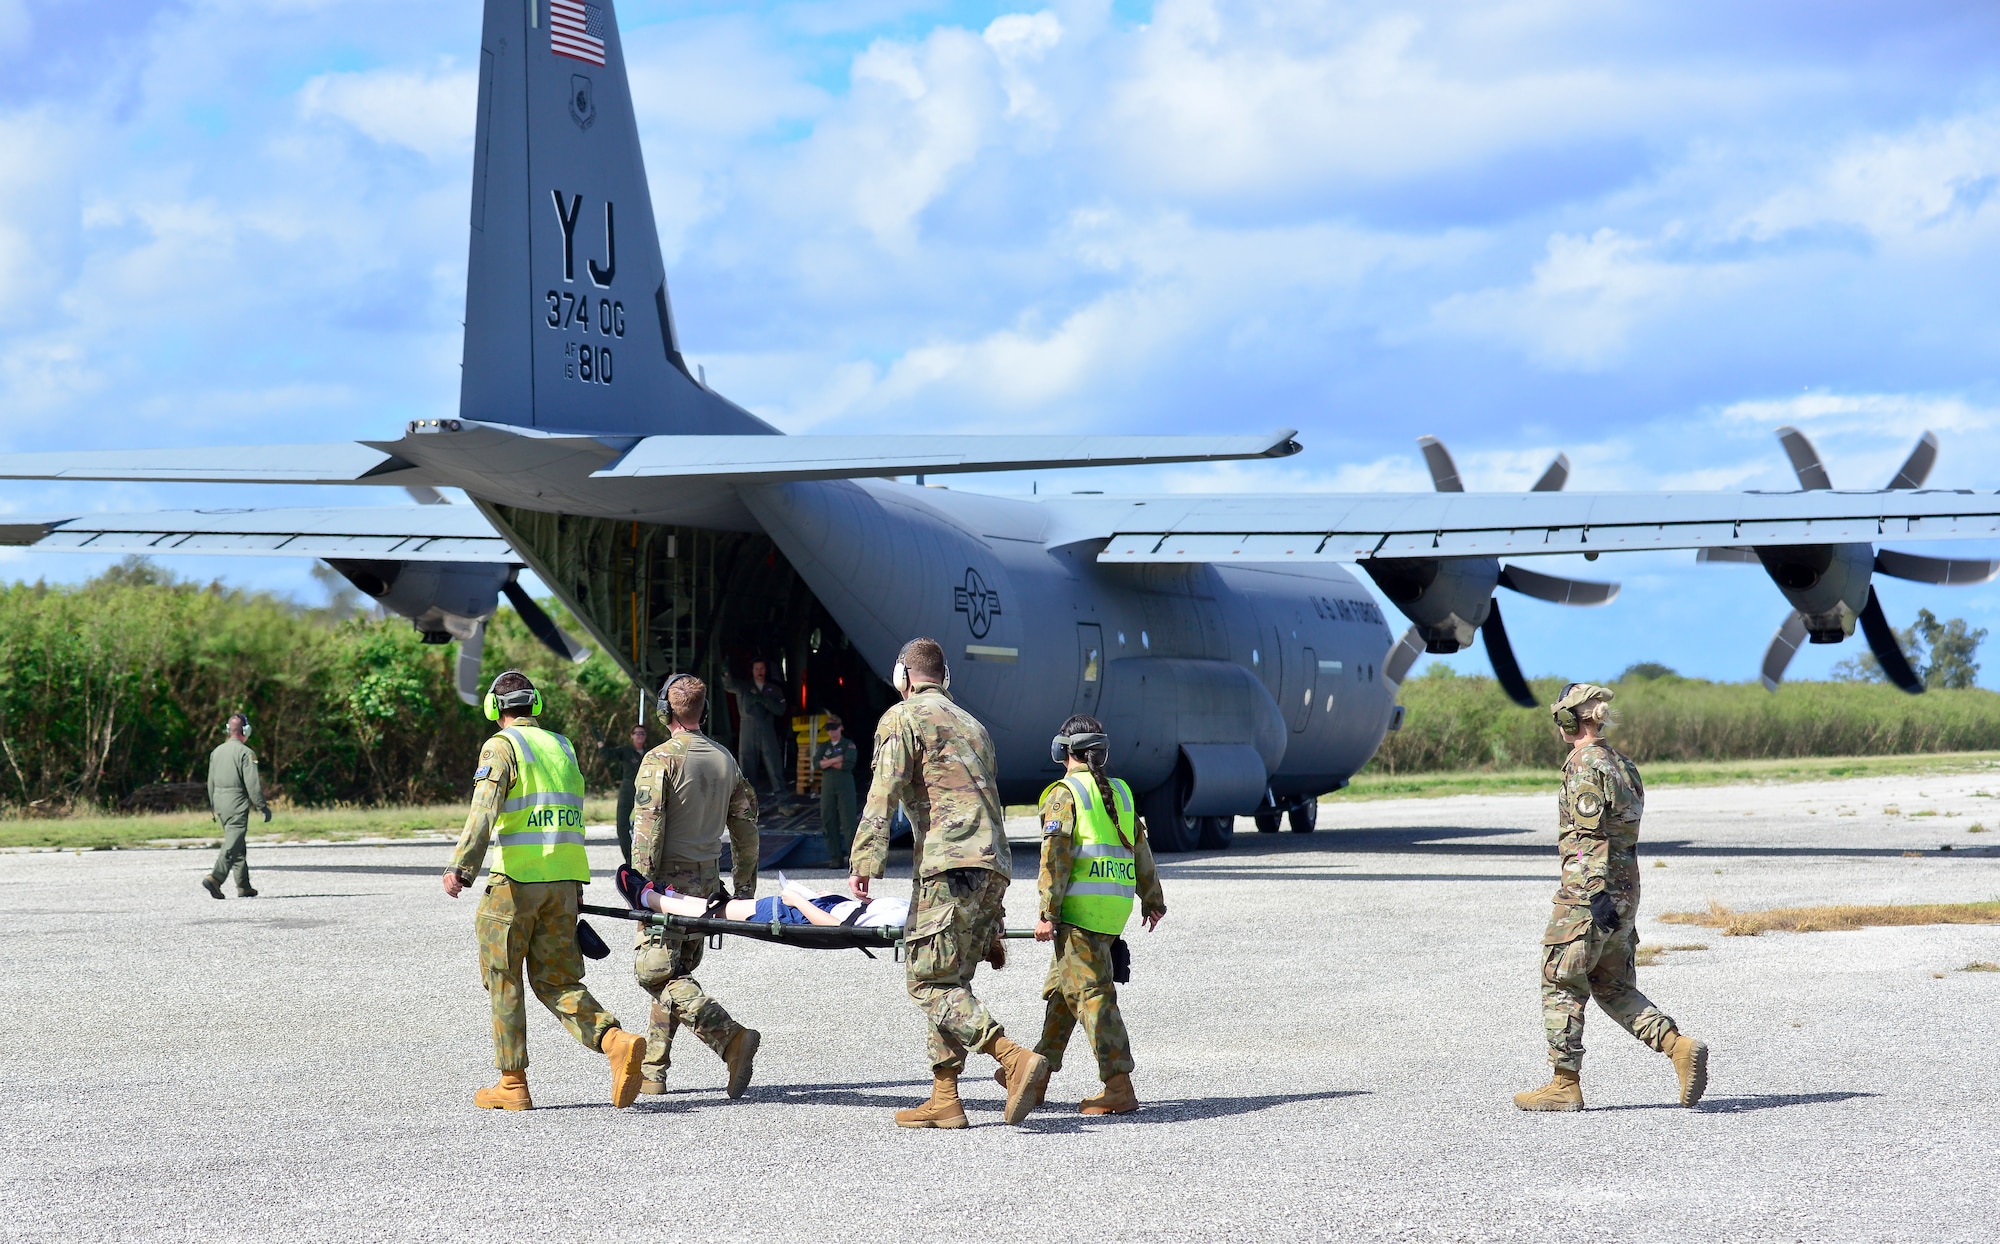 U.S. Air Force, Japan Air Self-Defense Force, and Royal Australian Air Force members utilize a USAF C-130J Super Hercules to perform logistical re-supply, medical evacuation, troop movement and humanitarian assistance during exercise COPE NORTH 18 at Tinian, U.S. Commonwealth of the Northern Marianas Islands, Feb. 19, 2018. Through exercises and engagements during COPE NORTH, USAF, Koku Jieitai and RAAF increase interoperability for humanitarian assistance/disaster relief operations. (U.S. Air Force photo by Airman 1st Class Christopher Quail)